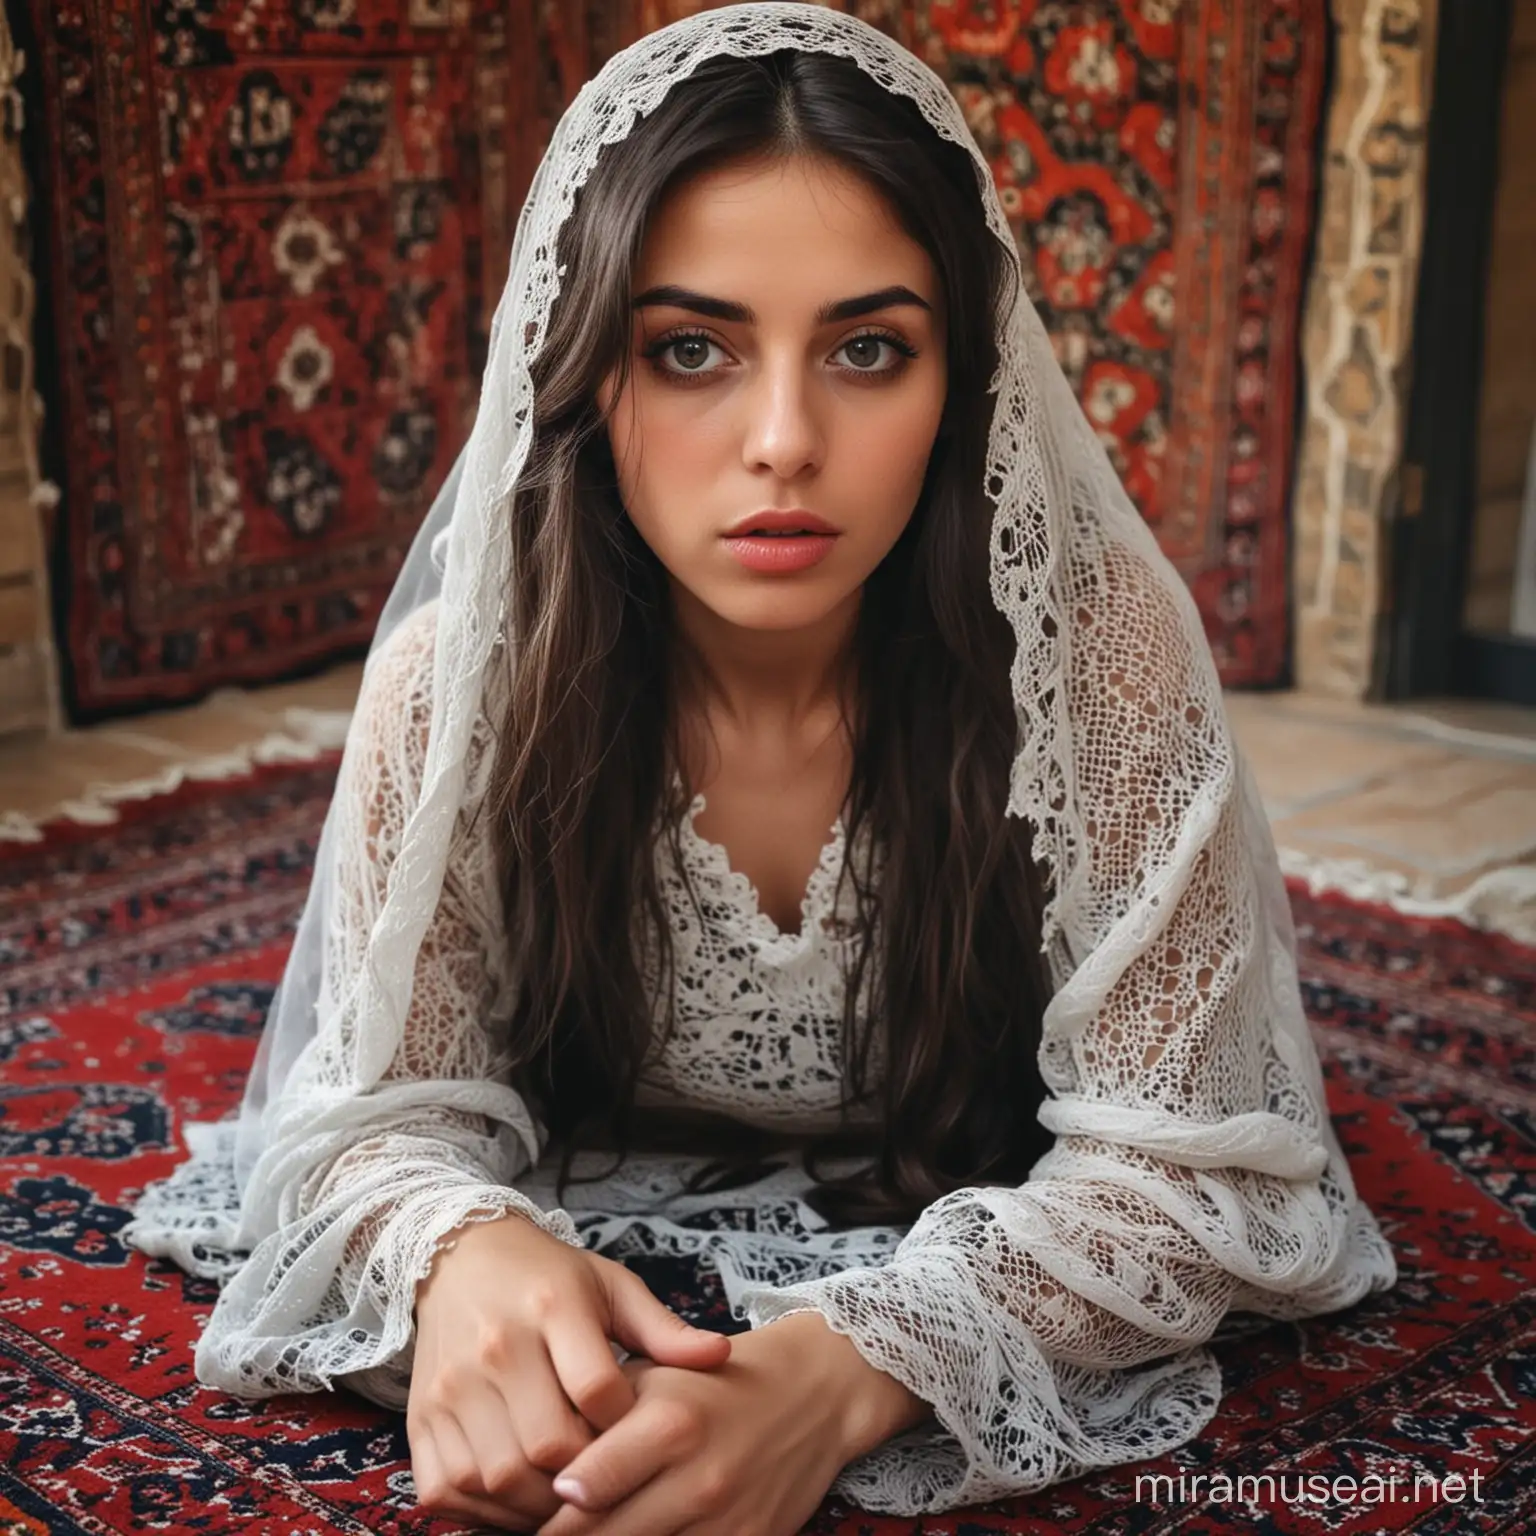 Angry Veiled Woman Sitting on Afghan Rug in Traditional House